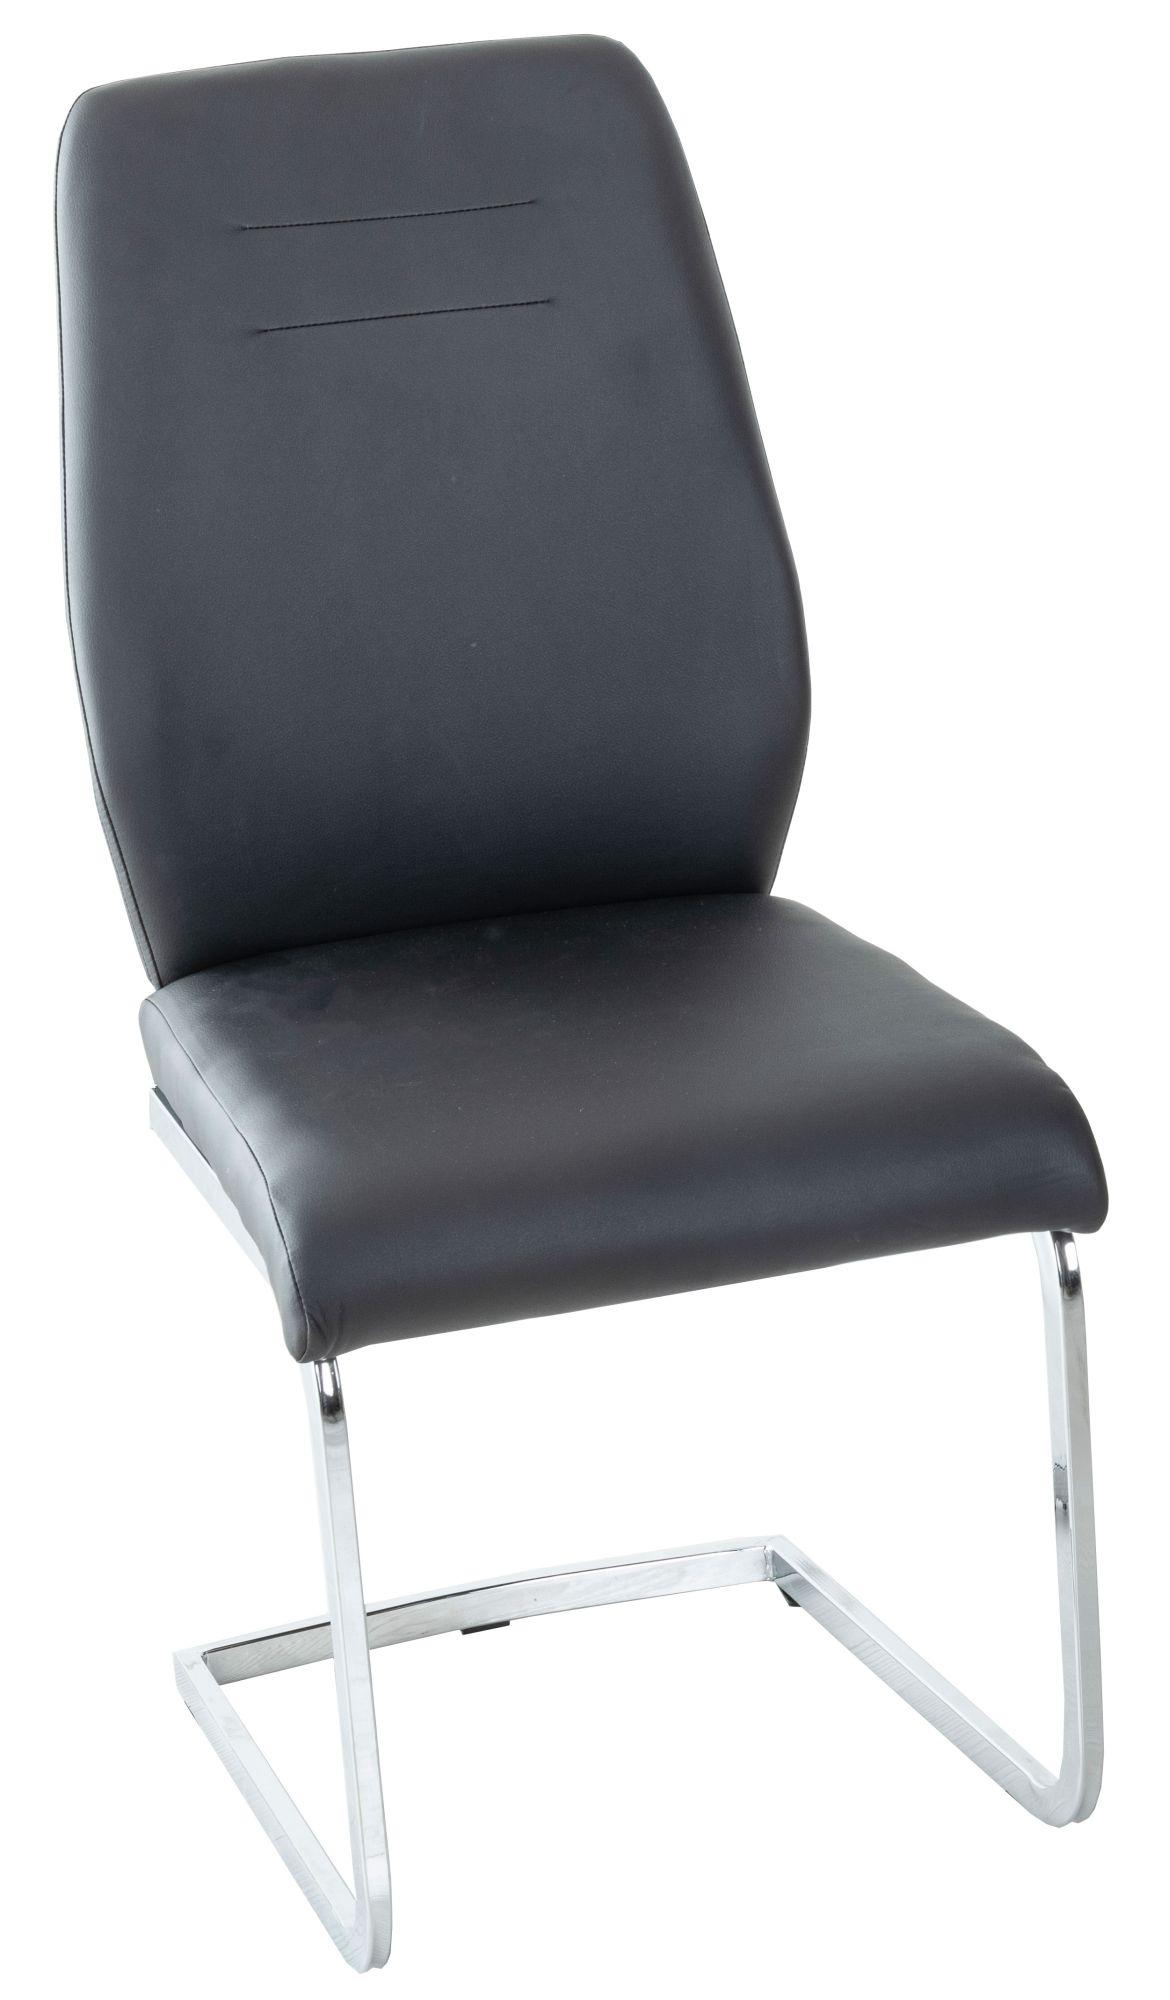 Oslo Black Leather Dining Chair with Stainless Steel Cantiliver Base